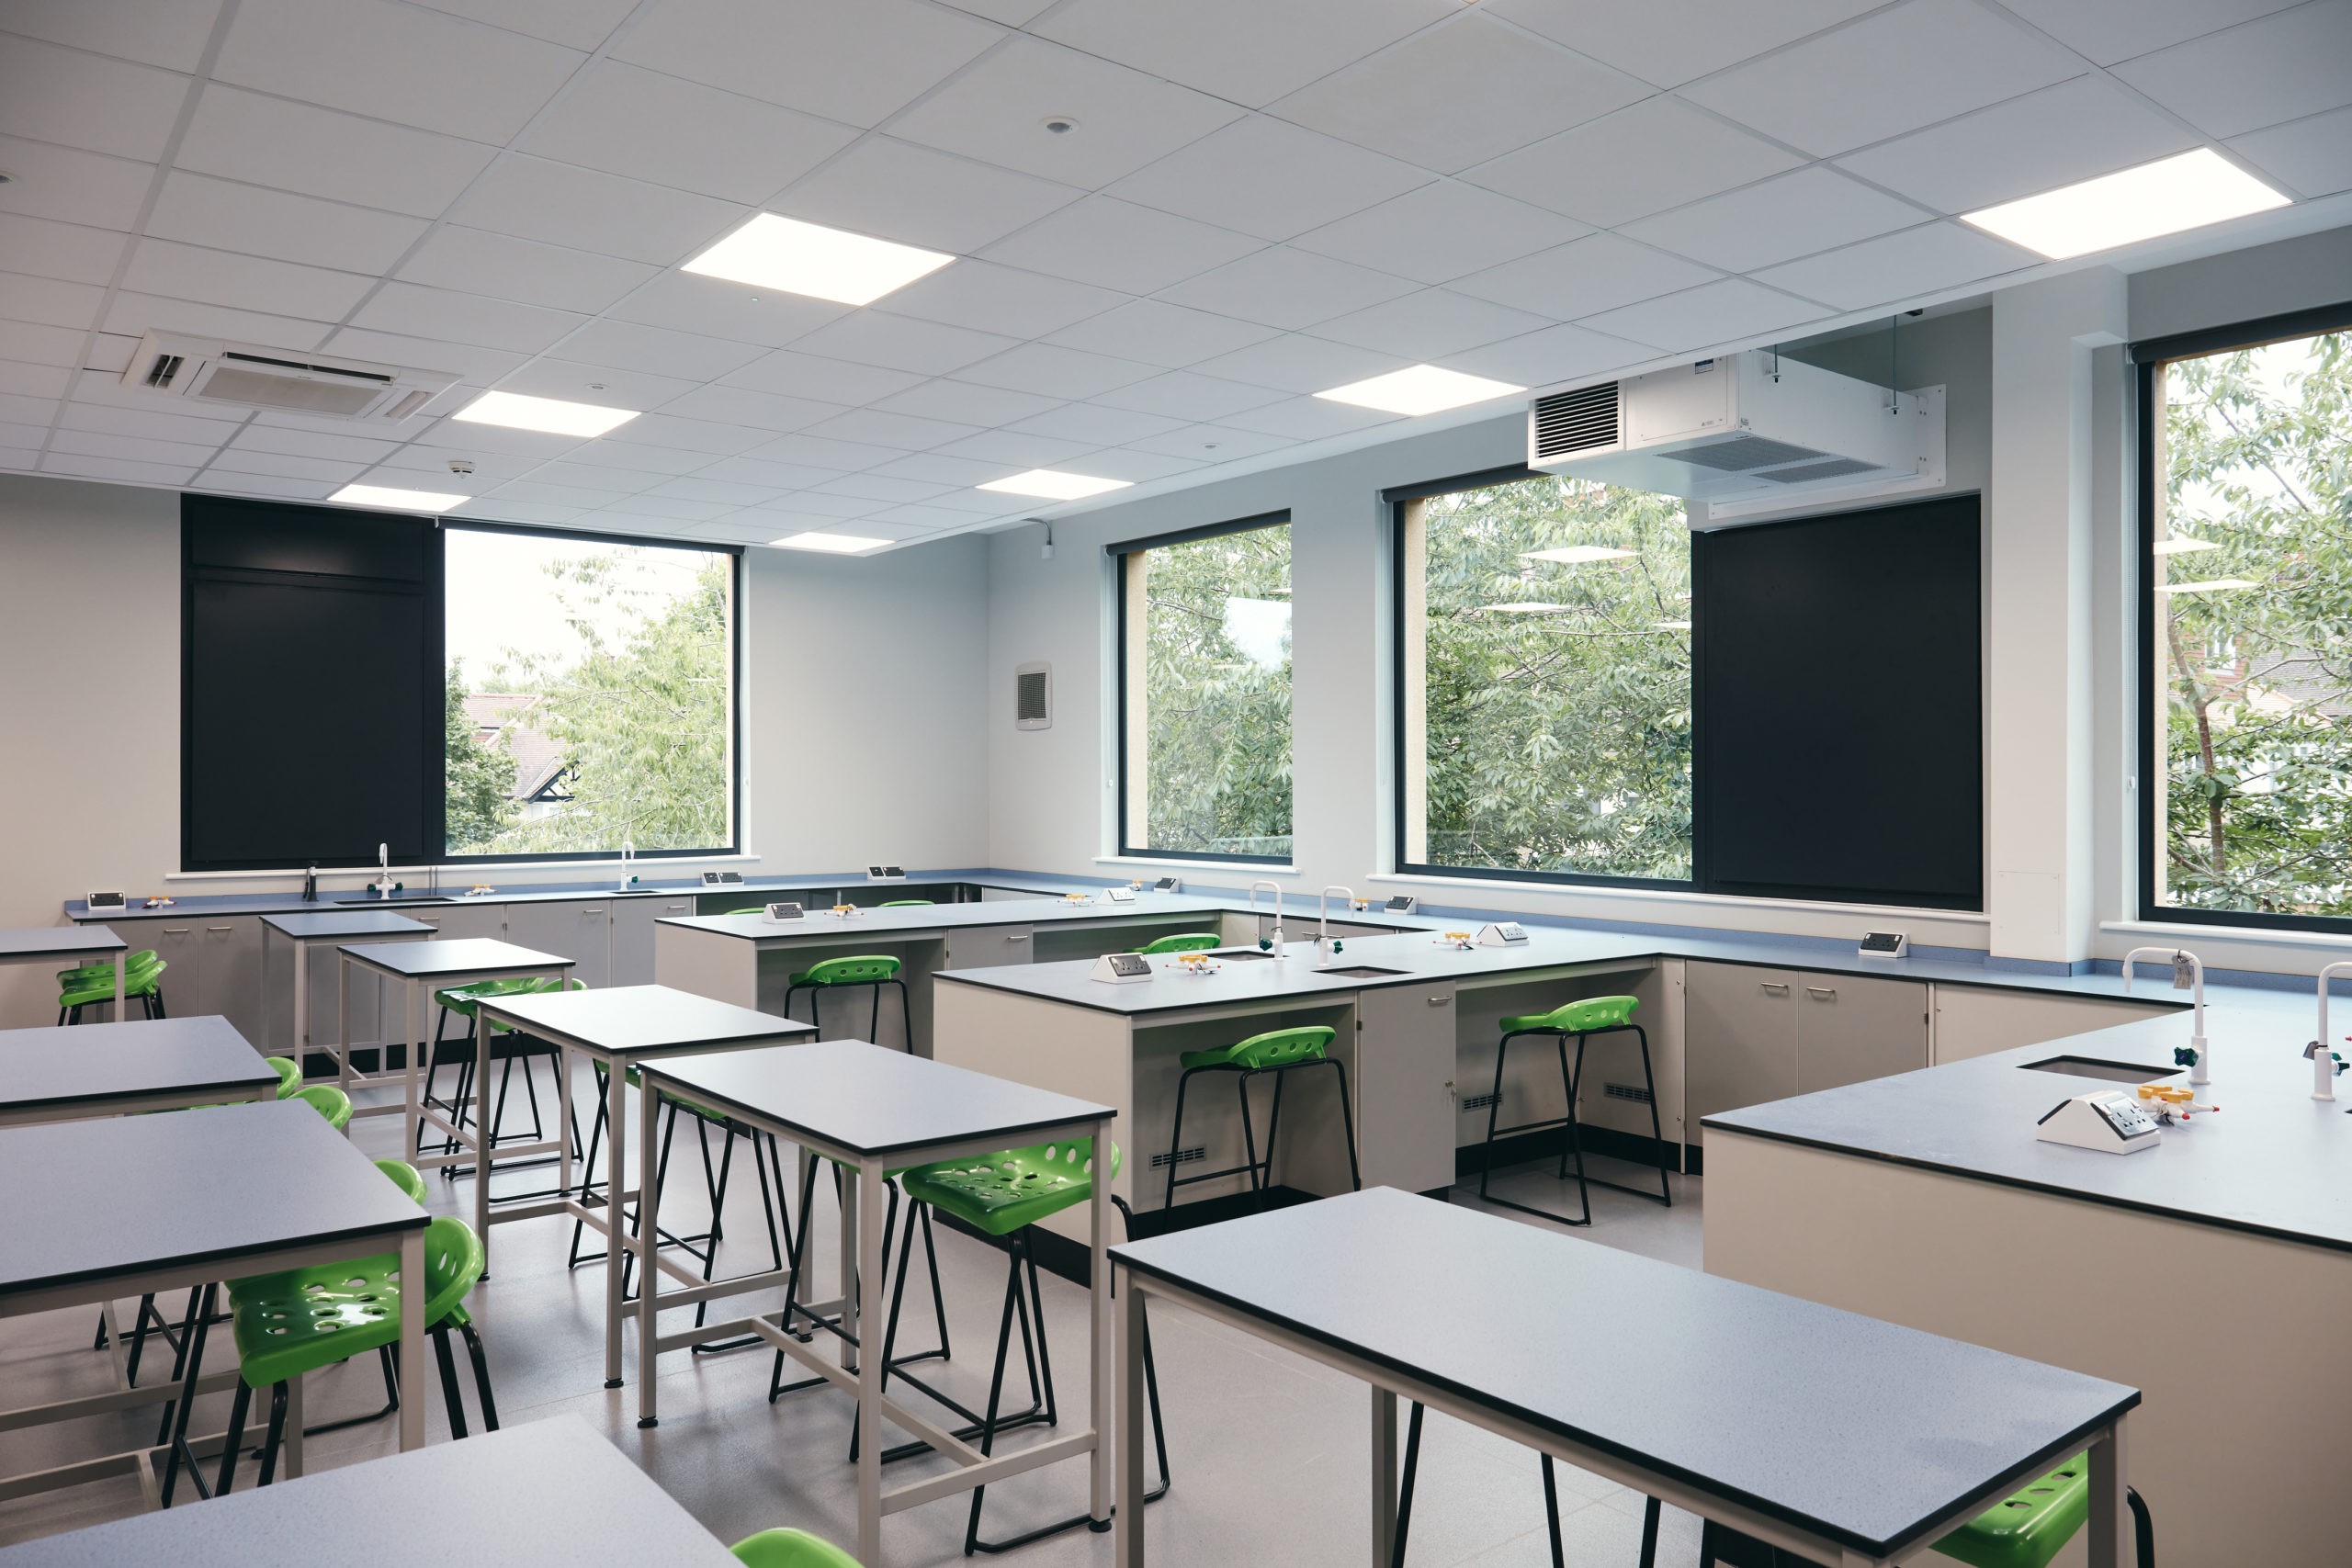 How modular buildings have revolutionised the way classrooms are delivered